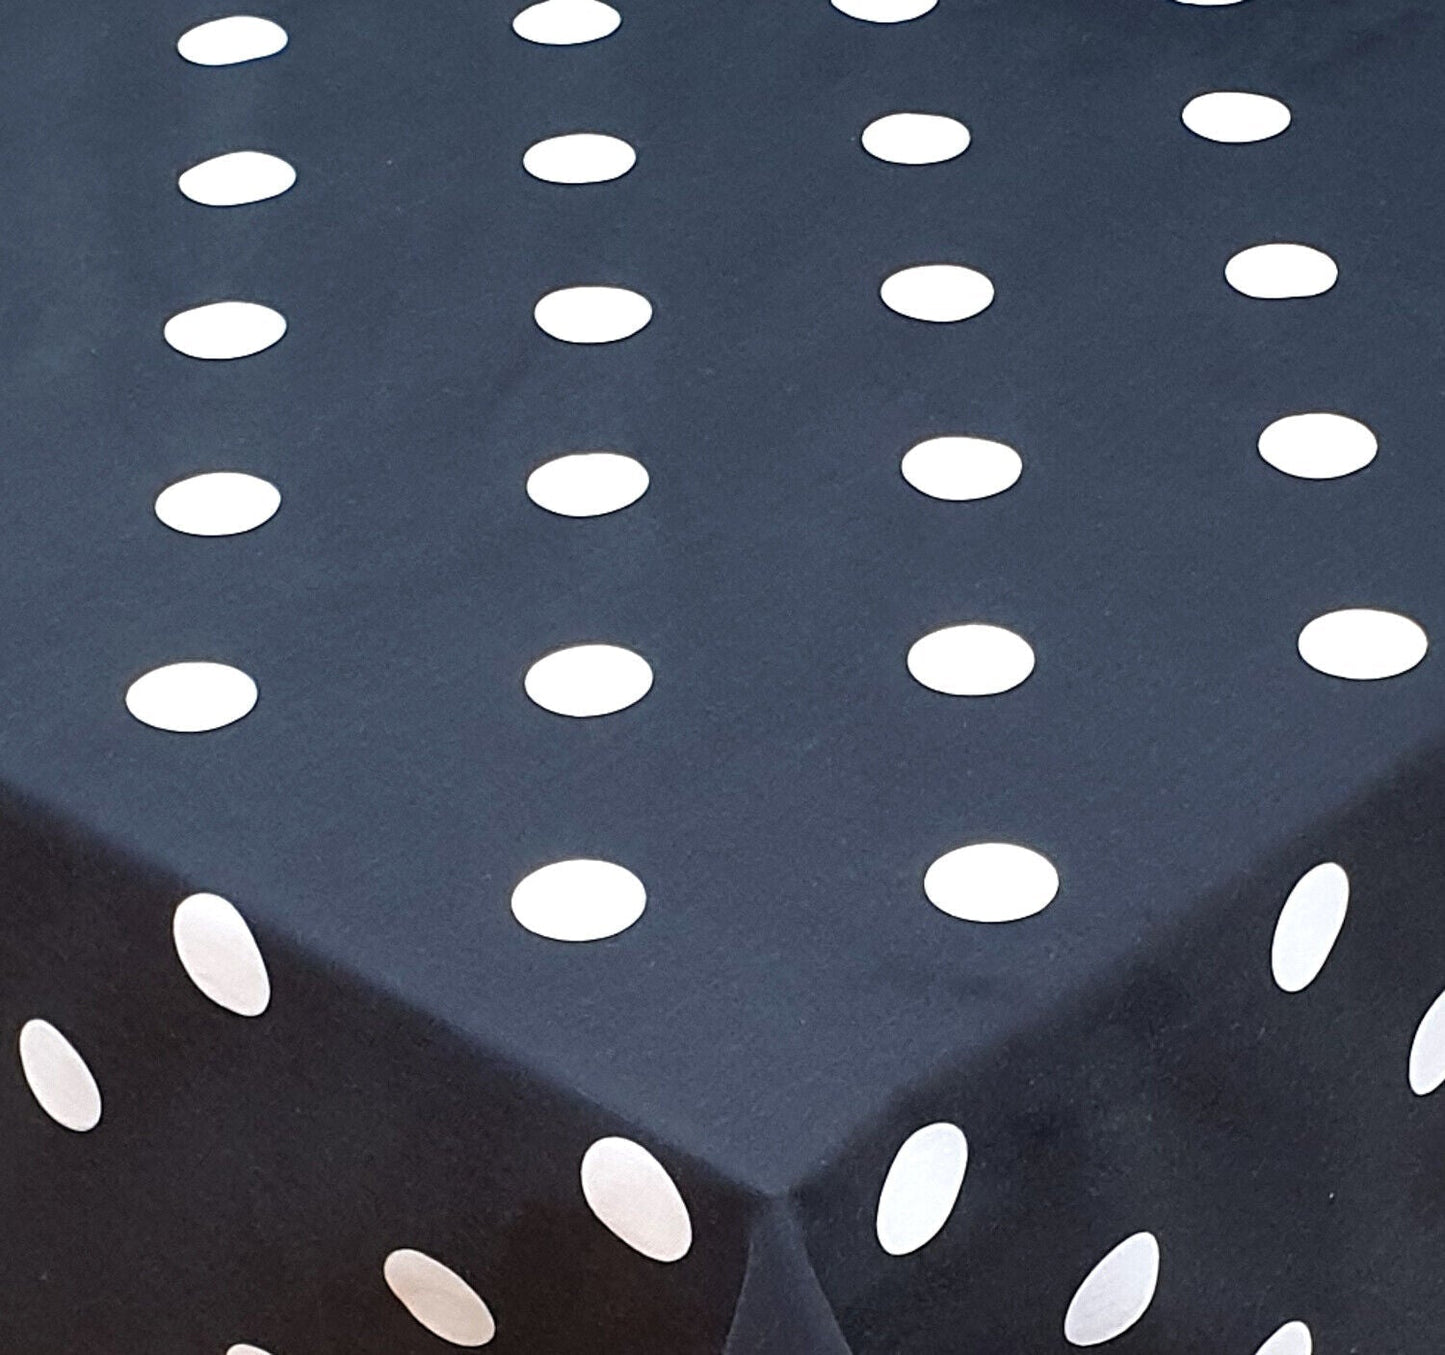 Emperor Size Fitted Sheet Polkadot Black White Cirlces Spotted